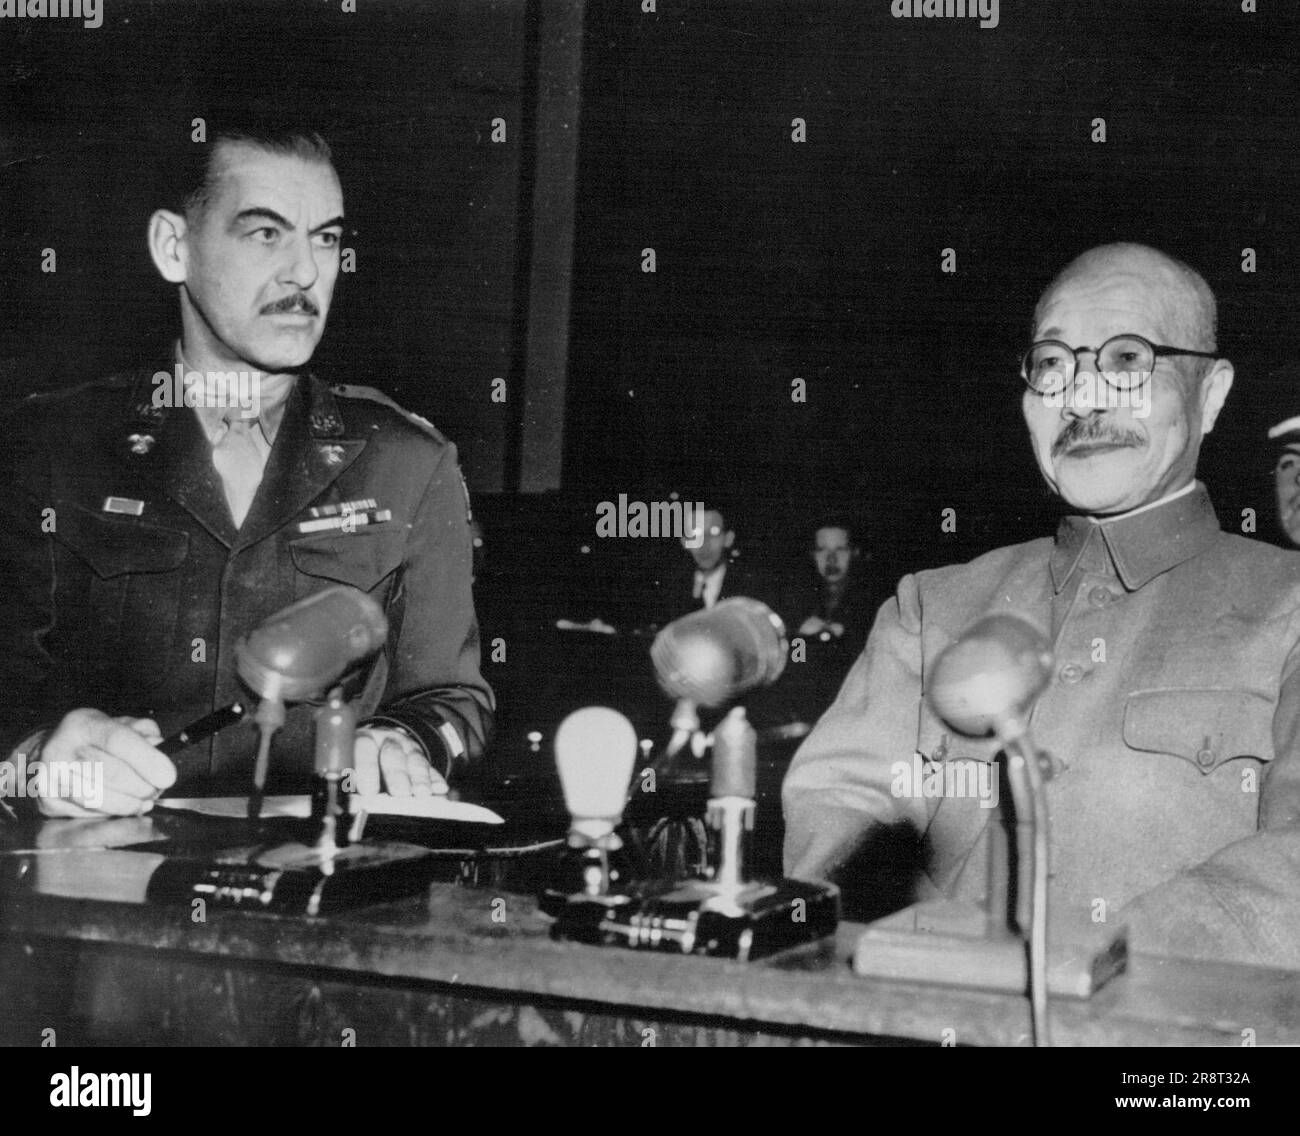 Tojo Sits in Witness Box at War Crimes Trial -- Japan's former premier, Hideki Tojo (right) seats self in witness box after being sworn in last Friday as a witness in his war crimes trial at Tokyo before the International Military Tribunal for the Far East. Capt. D.S. Van Meter, San Antonio, Texas, (left) marshal of the Tribunal court, administered the oath. December 29, 1947. (Photo by AP Wirephoto). Stock Photo